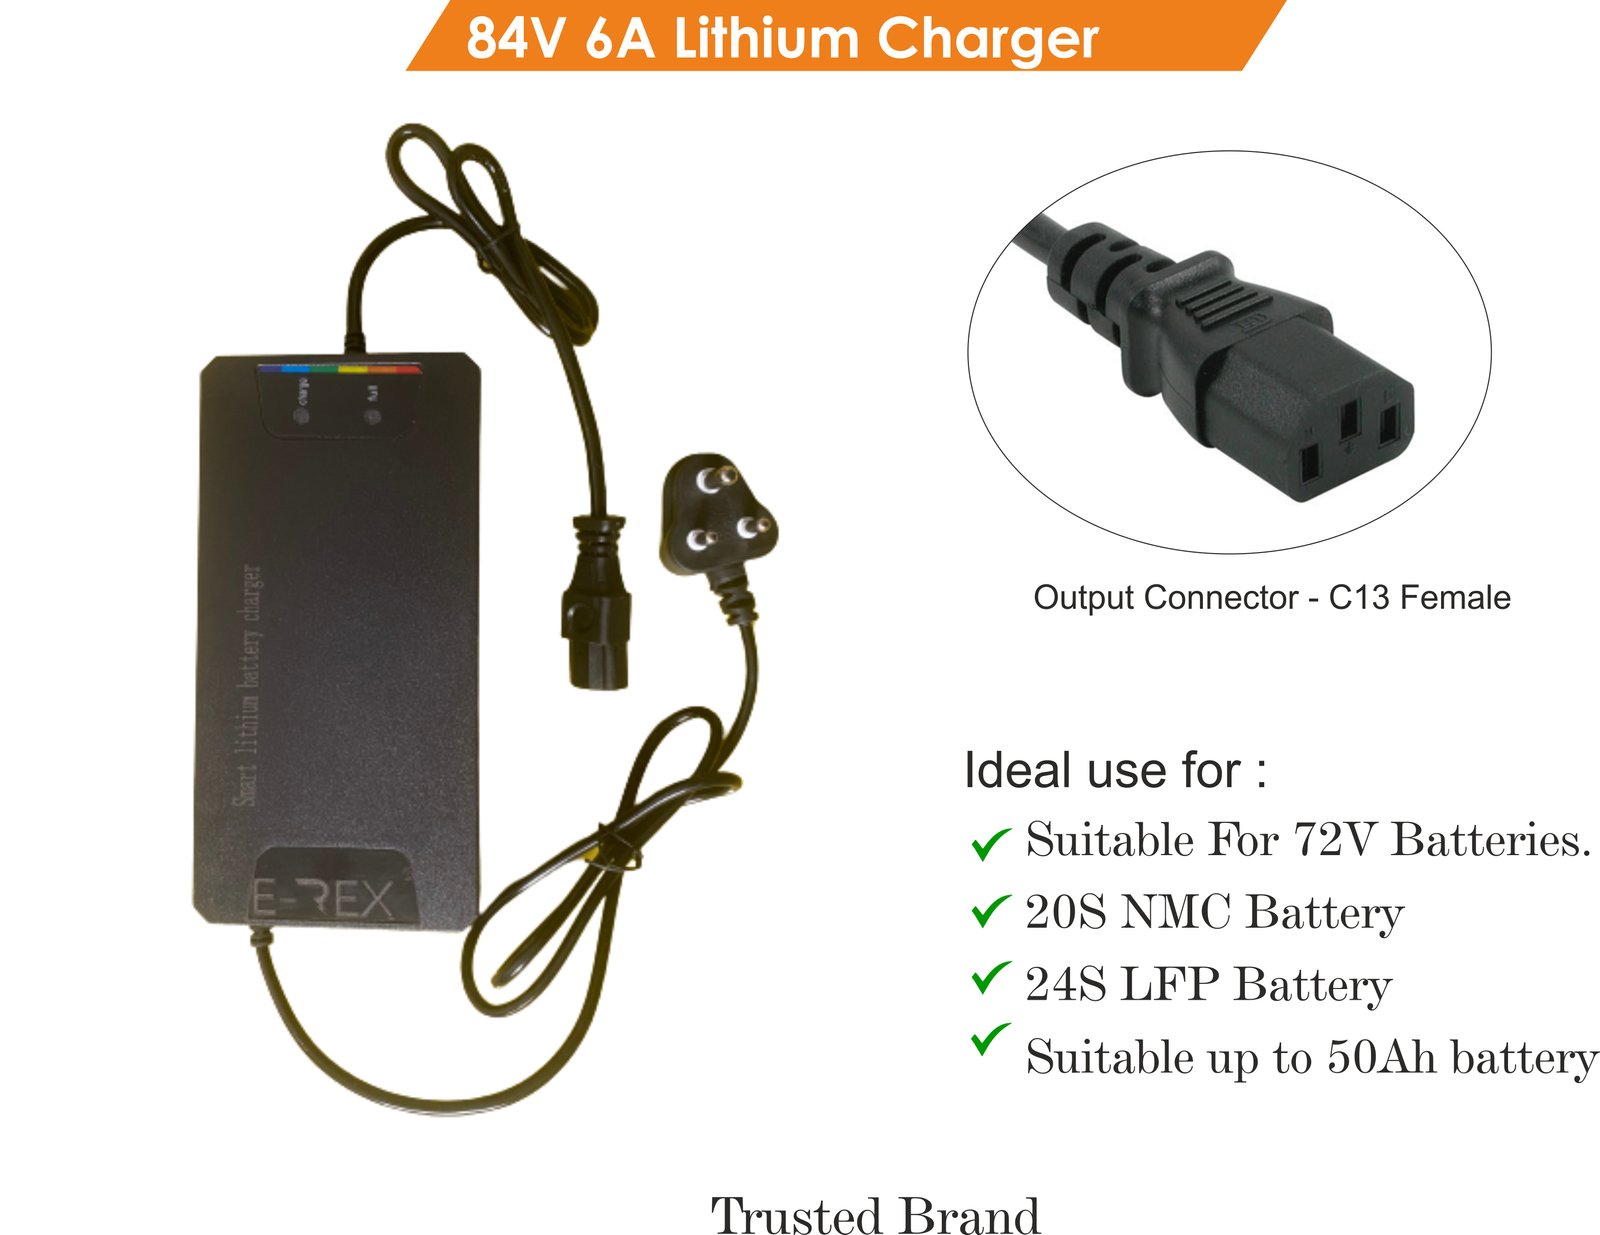 67.2v 1A-6A Fast Charger